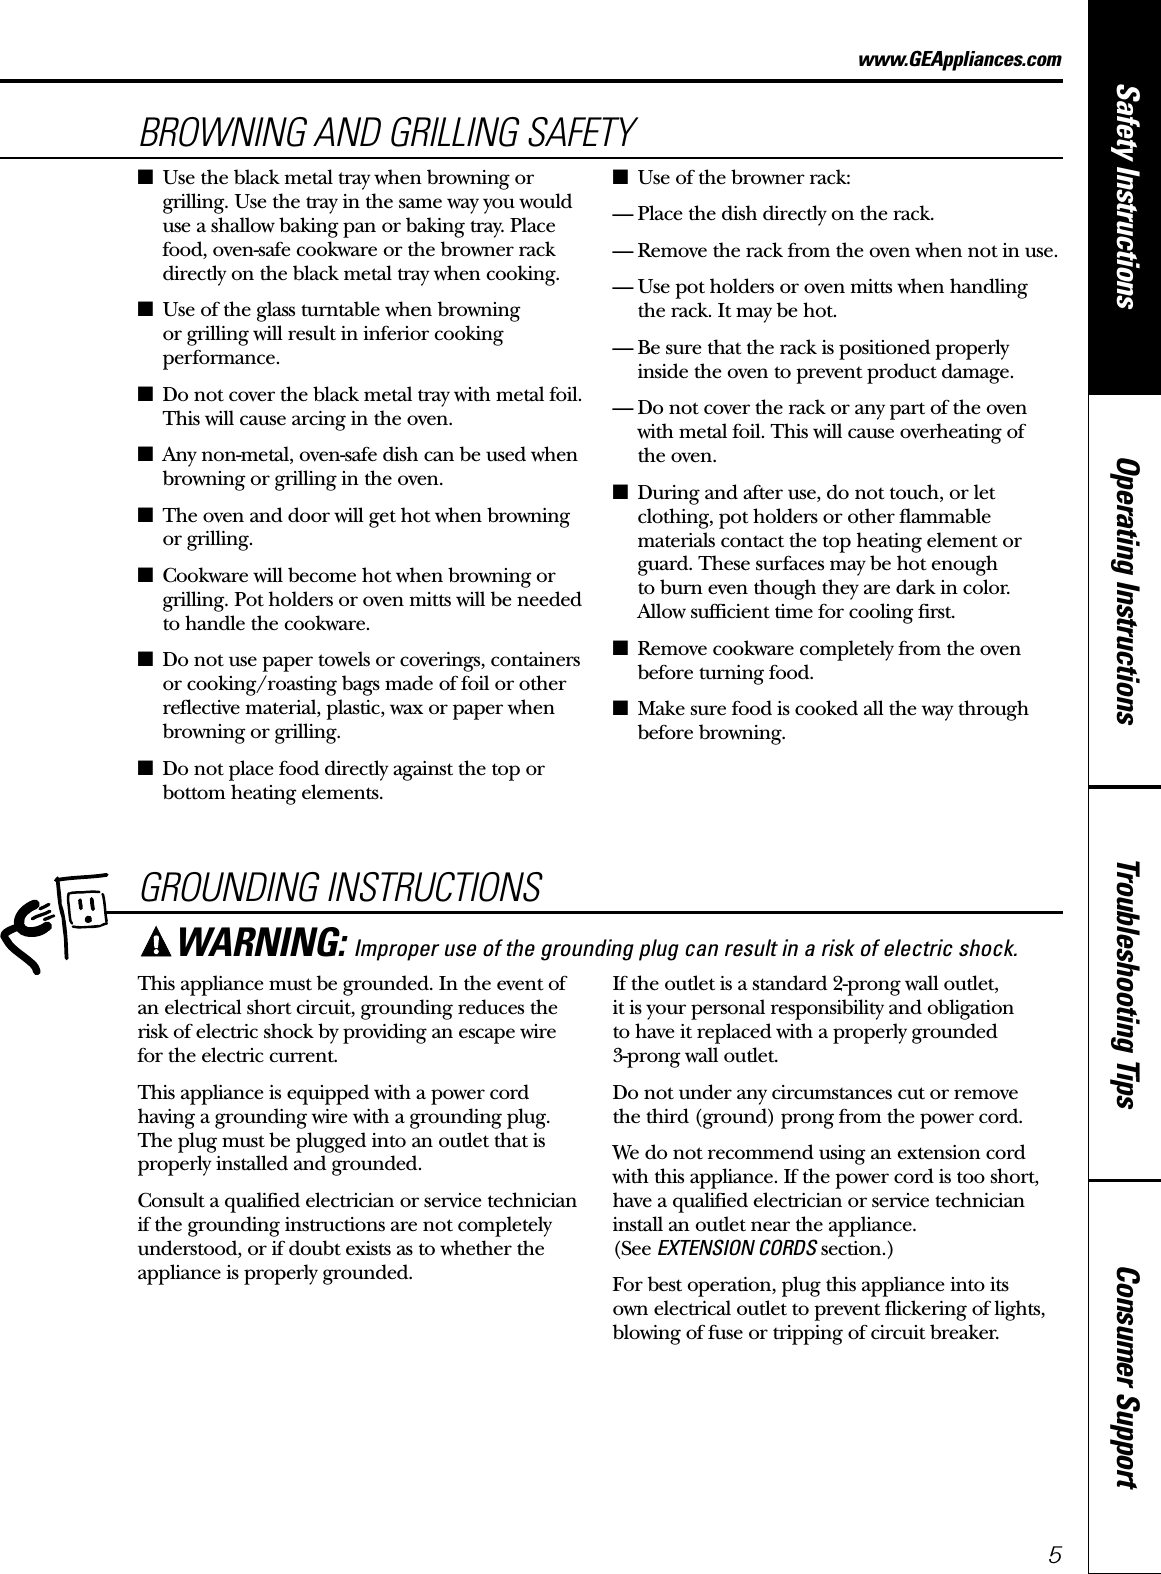 Consumer SupportTroubleshooting TipsOperating InstructionsSafety Instructions5GROUNDING INSTRUCTIONSThis appliance must be grounded. In the event ofan electrical short circuit, grounding reduces therisk of electric shock by providing an escape wire for the electric current. This appliance is equipped with a power cordhaving a grounding wire with a grounding plug.The plug must be plugged into an outlet that isproperly installed and grounded.Consult a qualified electrician or service technicianif the grounding instructions are not completelyunderstood, or if doubt exists as to whether theappliance is properly grounded.If the outlet is a standard 2-prong wall outlet, it is your personal responsibility and obligation to have it replaced with a properly grounded 3-prong wall outlet.Do not under any circumstances cut or remove the third (ground) prong from the power cord.We do not recommend using an extension cordwith this appliance. If the power cord is too short,have a qualified electrician or service technicianinstall an outlet near the appliance. (See EXTENSION CORDS section.)For best operation, plug this appliance into its own electrical outlet to prevent flickering of lights,blowing of fuse or tripping of circuit breaker.WARNING: Improper use of the grounding plug can result in a risk of electric shock.www.GEAppliances.comBROWNING AND GRILLING SAFETY■Use the black metal tray when browning orgrilling. Use the tray in the same way you woulduse a shallow baking pan or baking tray. Placefood, oven-safe cookware or the browner rackdirectly on the black metal tray when cooking.■Use of the glass turntable when browning or grilling will result in inferior cookingperformance.■Do not cover the black metal tray with metal foil.This will cause arcing in the oven.■Any non-metal, oven-safe dish can be used whenbrowning or grilling in the oven.■The oven and door will get hot when browningor grilling.■Cookware will become hot when browning orgrilling. Pot holders or oven mitts will be neededto handle the cookware.■Do not use paper towels or coverings, containersor cooking/roasting bags made of foil or otherreflective material, plastic, wax or paper whenbrowning or grilling.■Do not place food directly against the top orbottom heating elements.■Use of the browner rack:— Place the dish directly on the rack.— Remove the rack from the oven when not in use.— Use pot holders or oven mitts when handling the rack. It may be hot.— Be sure that the rack is positioned properly inside the oven to prevent product damage.— Do not cover the rack or any part of the ovenwith metal foil. This will cause overheating of the oven.■During and after use, do not touch, or letclothing, pot holders or other flammablematerials contact the top heating element orguard. These surfaces may be hot enough to burn even though they are dark in color. Allow sufficient time for cooling first.■Remove cookware completely from the ovenbefore turning food.■Make sure food is cooked all the way throughbefore browning.